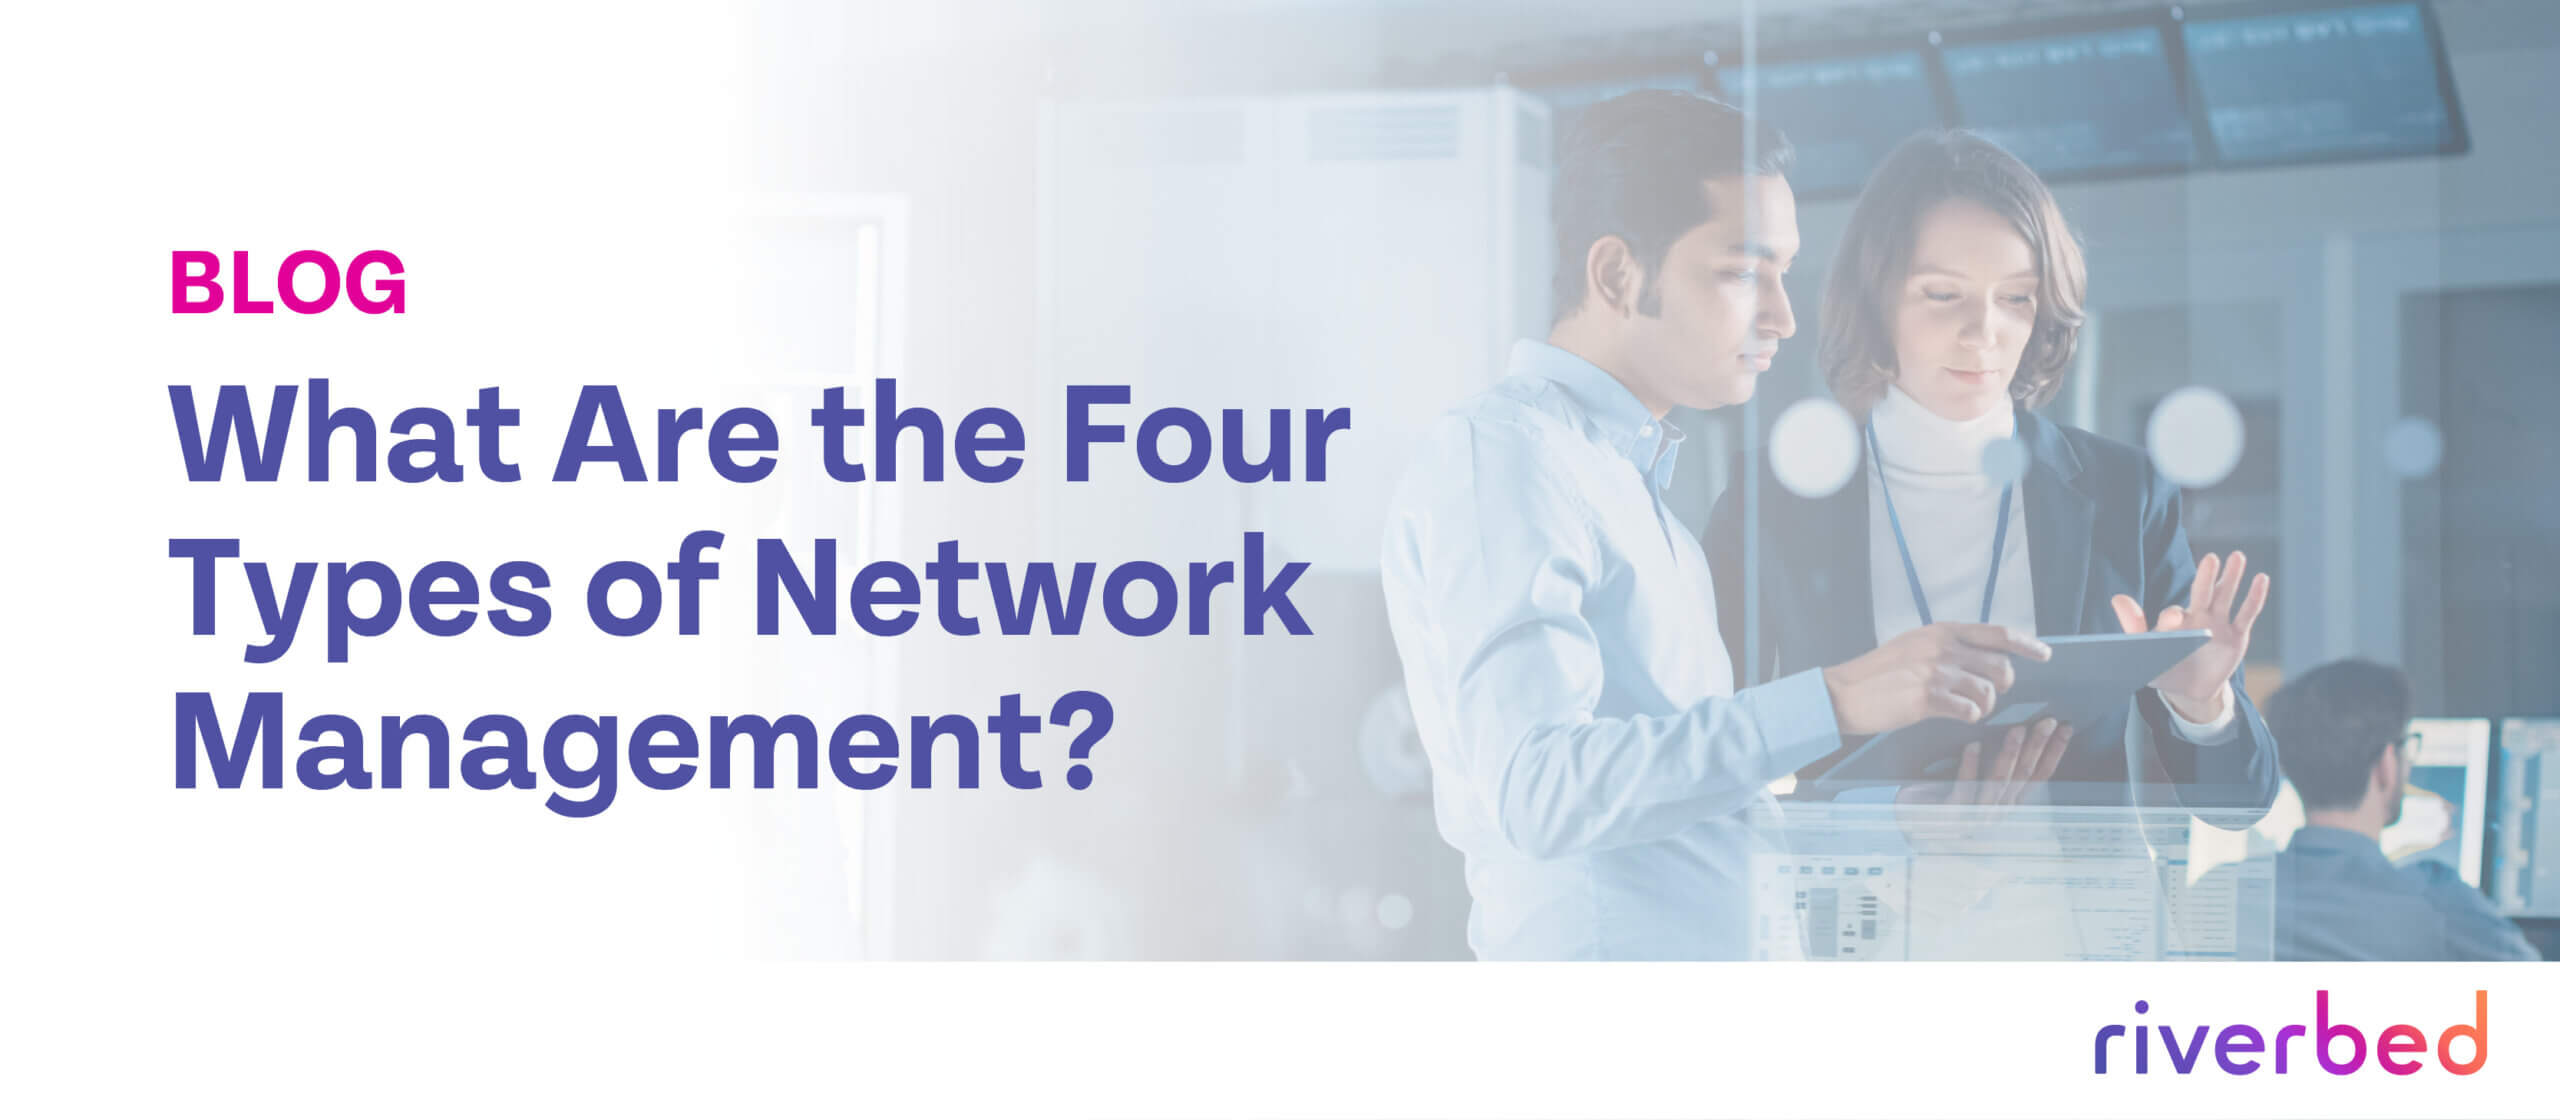 What Are the Four Types of Network Management?